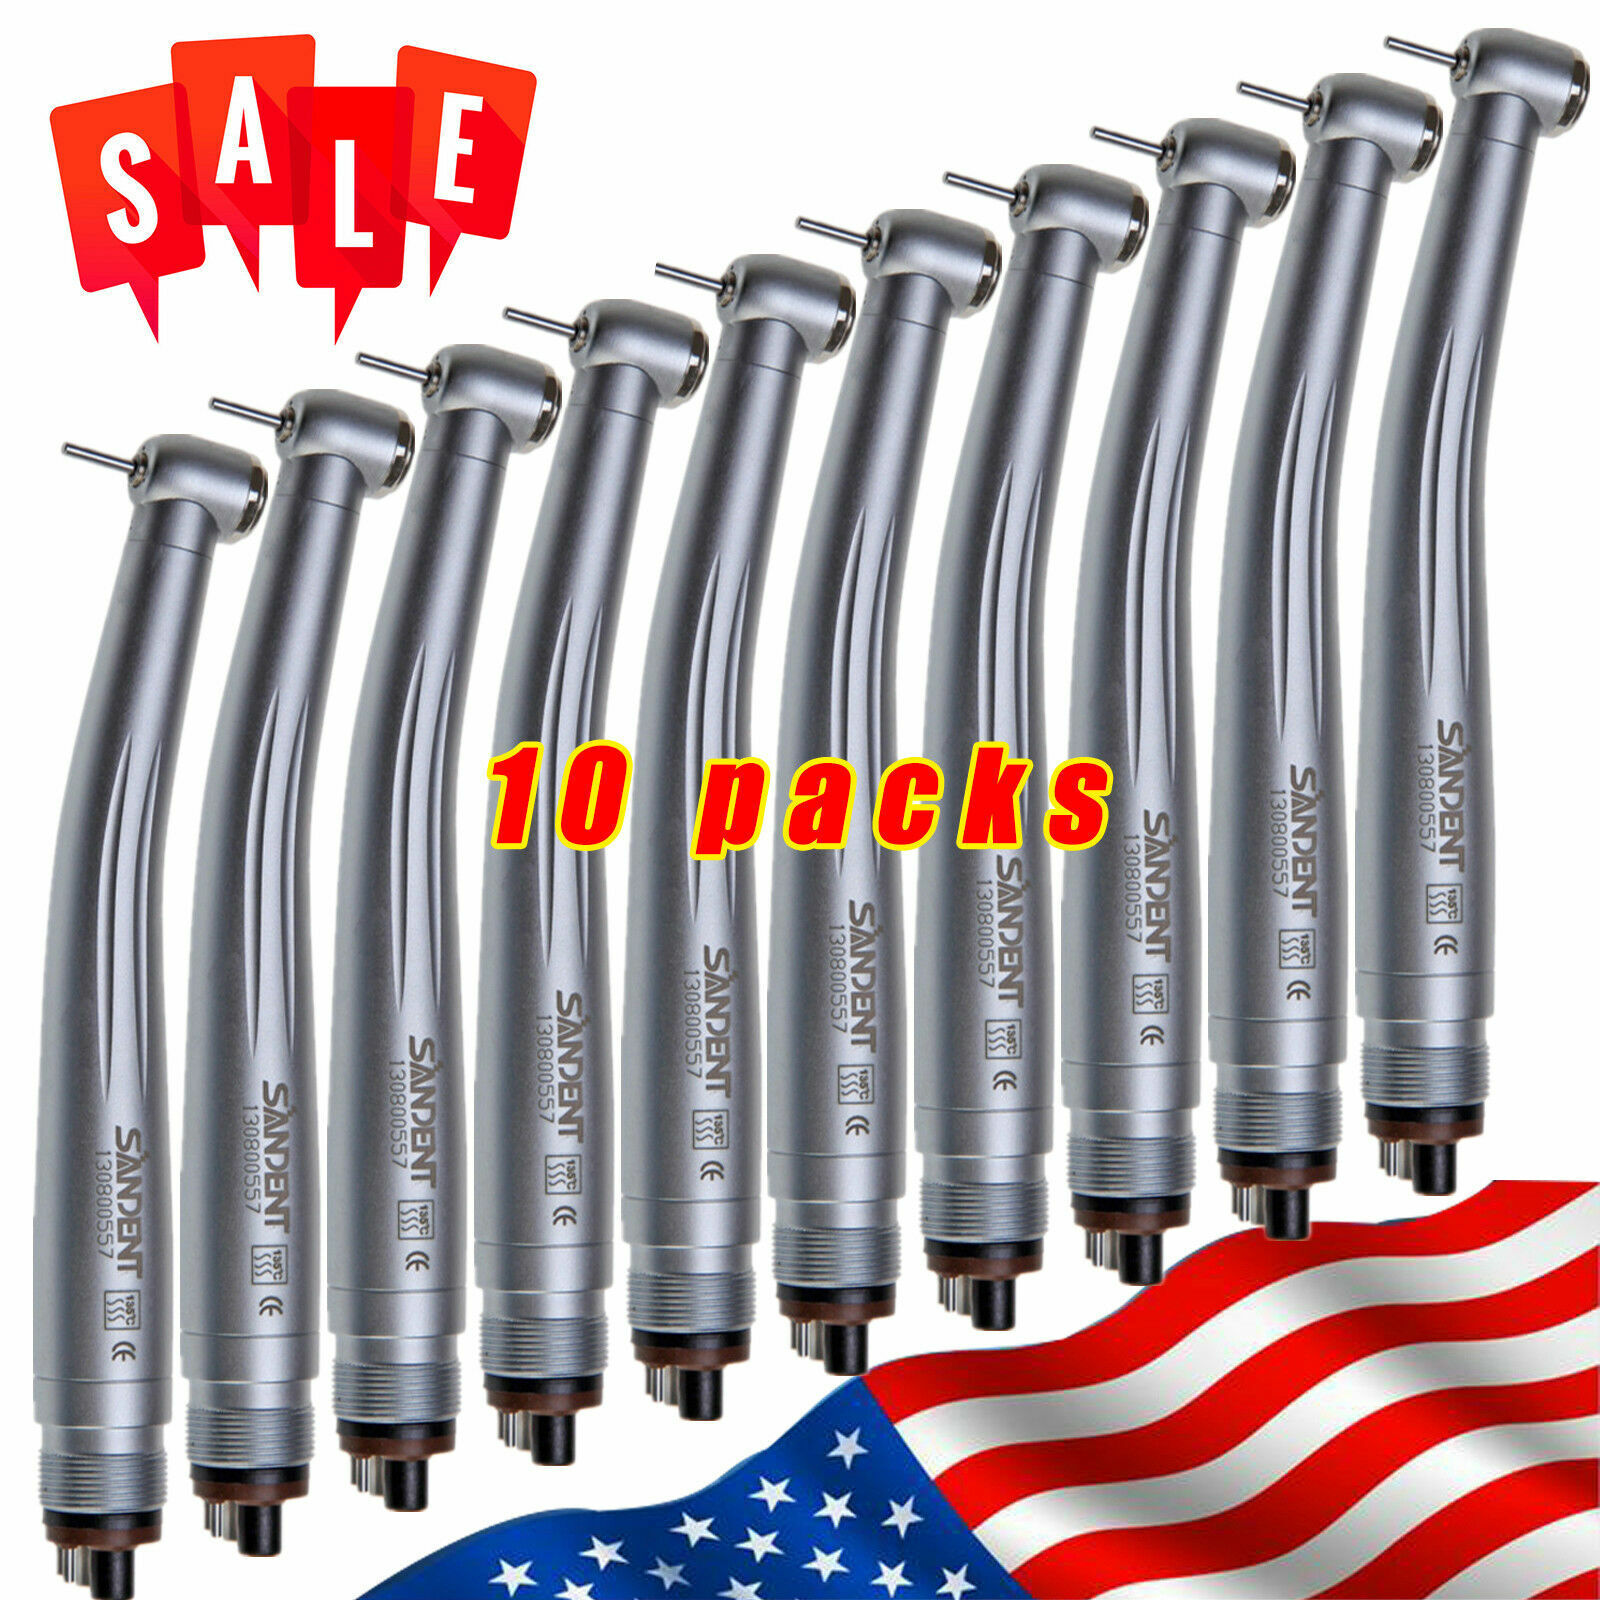 10 Pcs NSK PANA MAX Style Dental High Speed Push Button Handpiece 4 Hole SANDENT SANDENT Does not apply